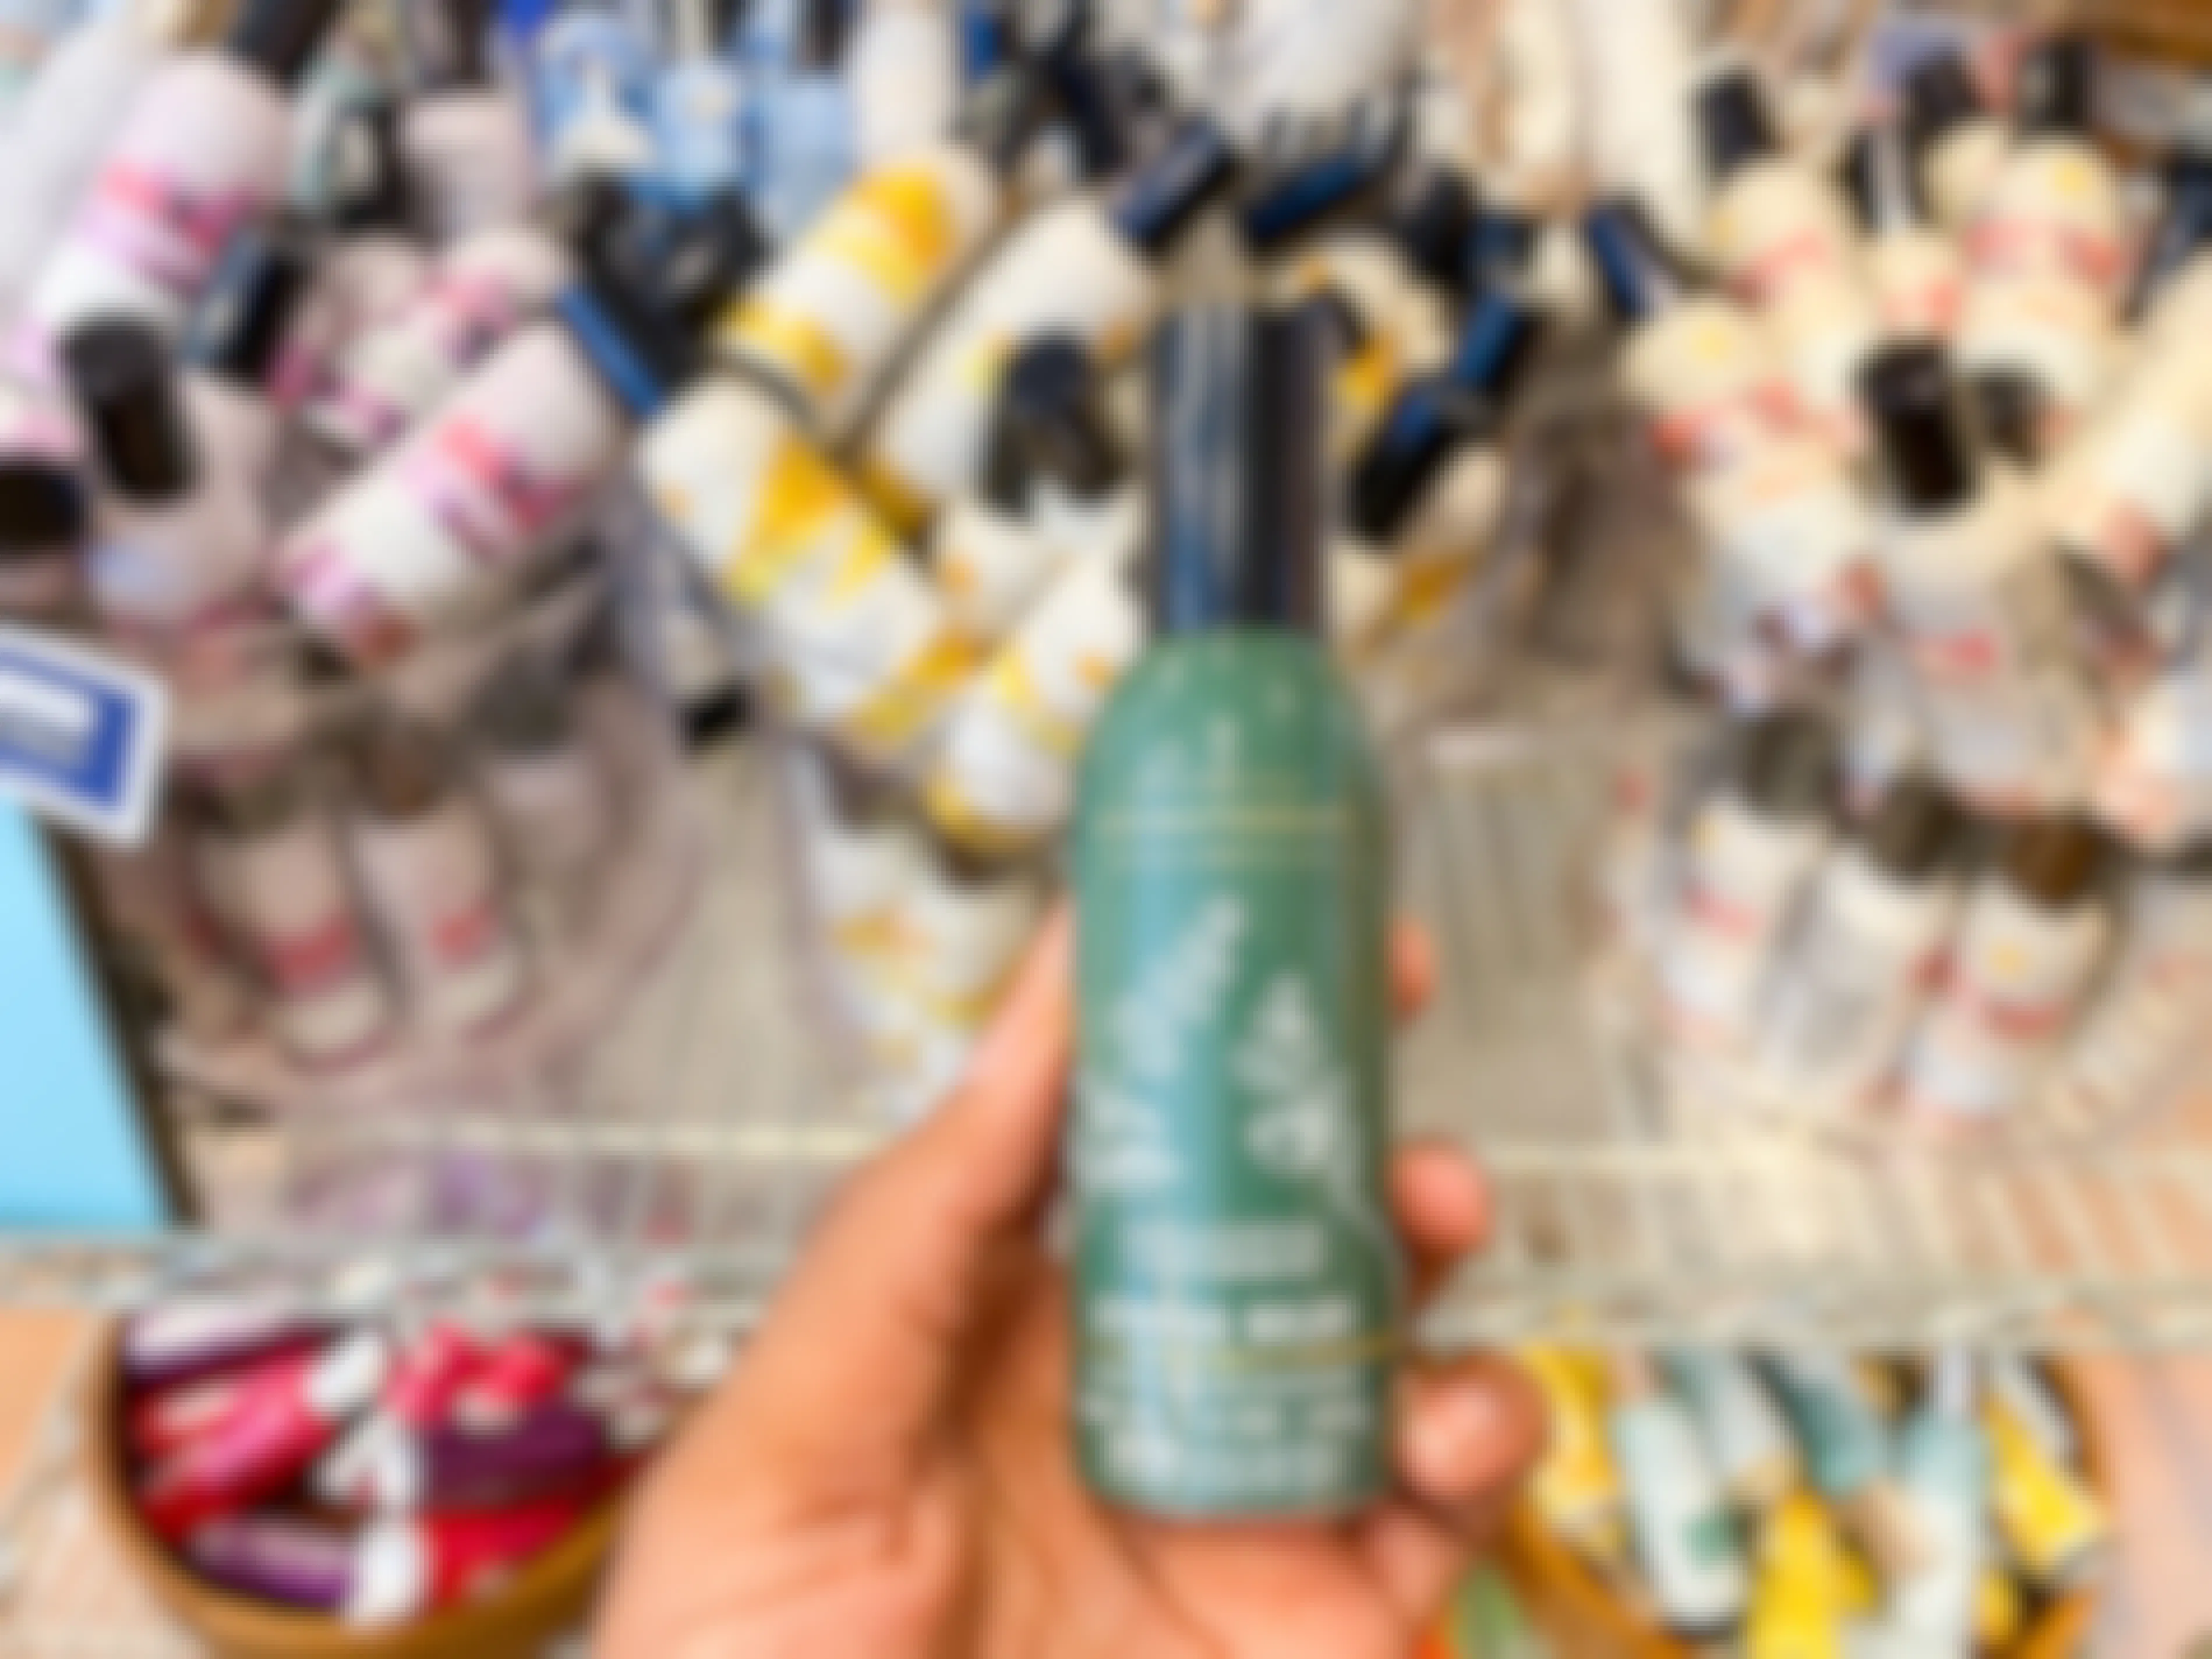 Bath and Body Works concentrated room spray